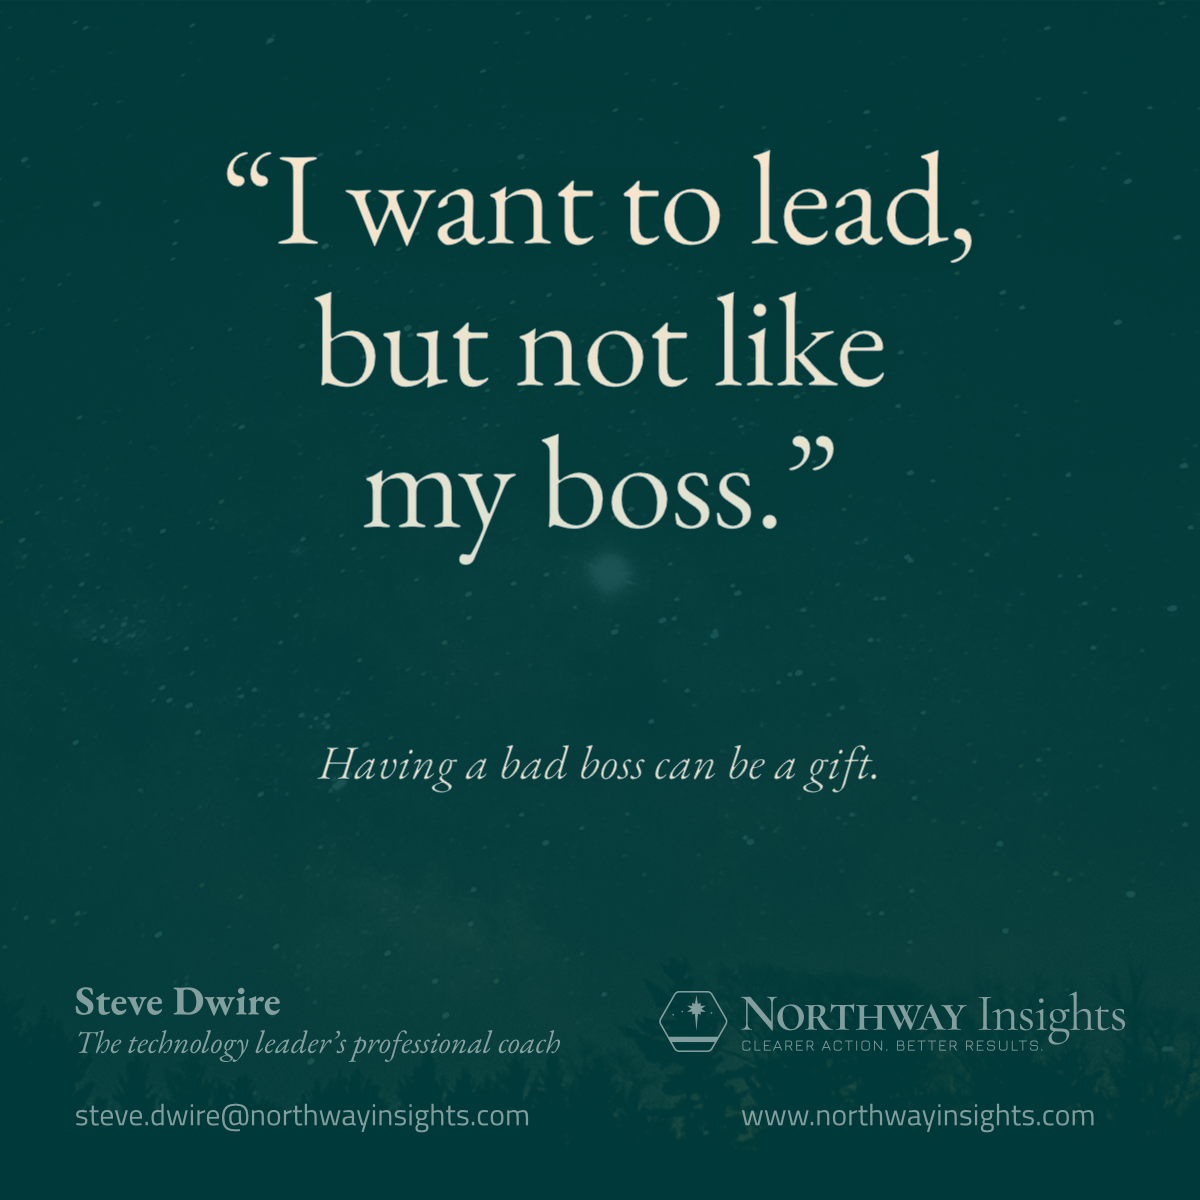 “I want to lead, but not like my boss.”